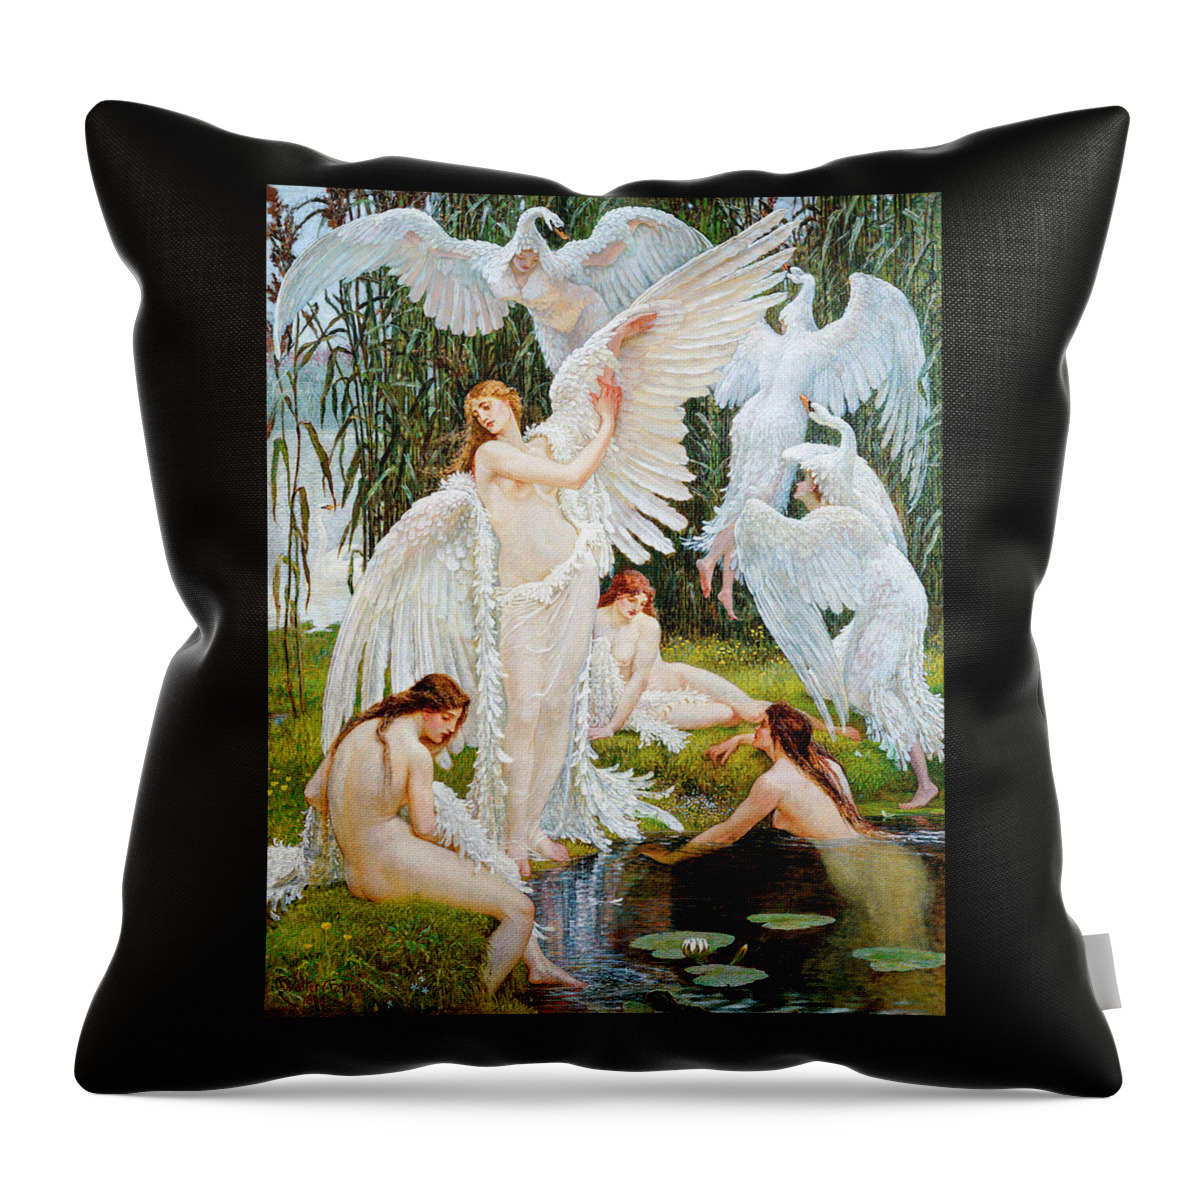 The Swan Maidens Throw Pillow featuring the painting The Swan Maidens by Walter Crane 1894 by Walter crane